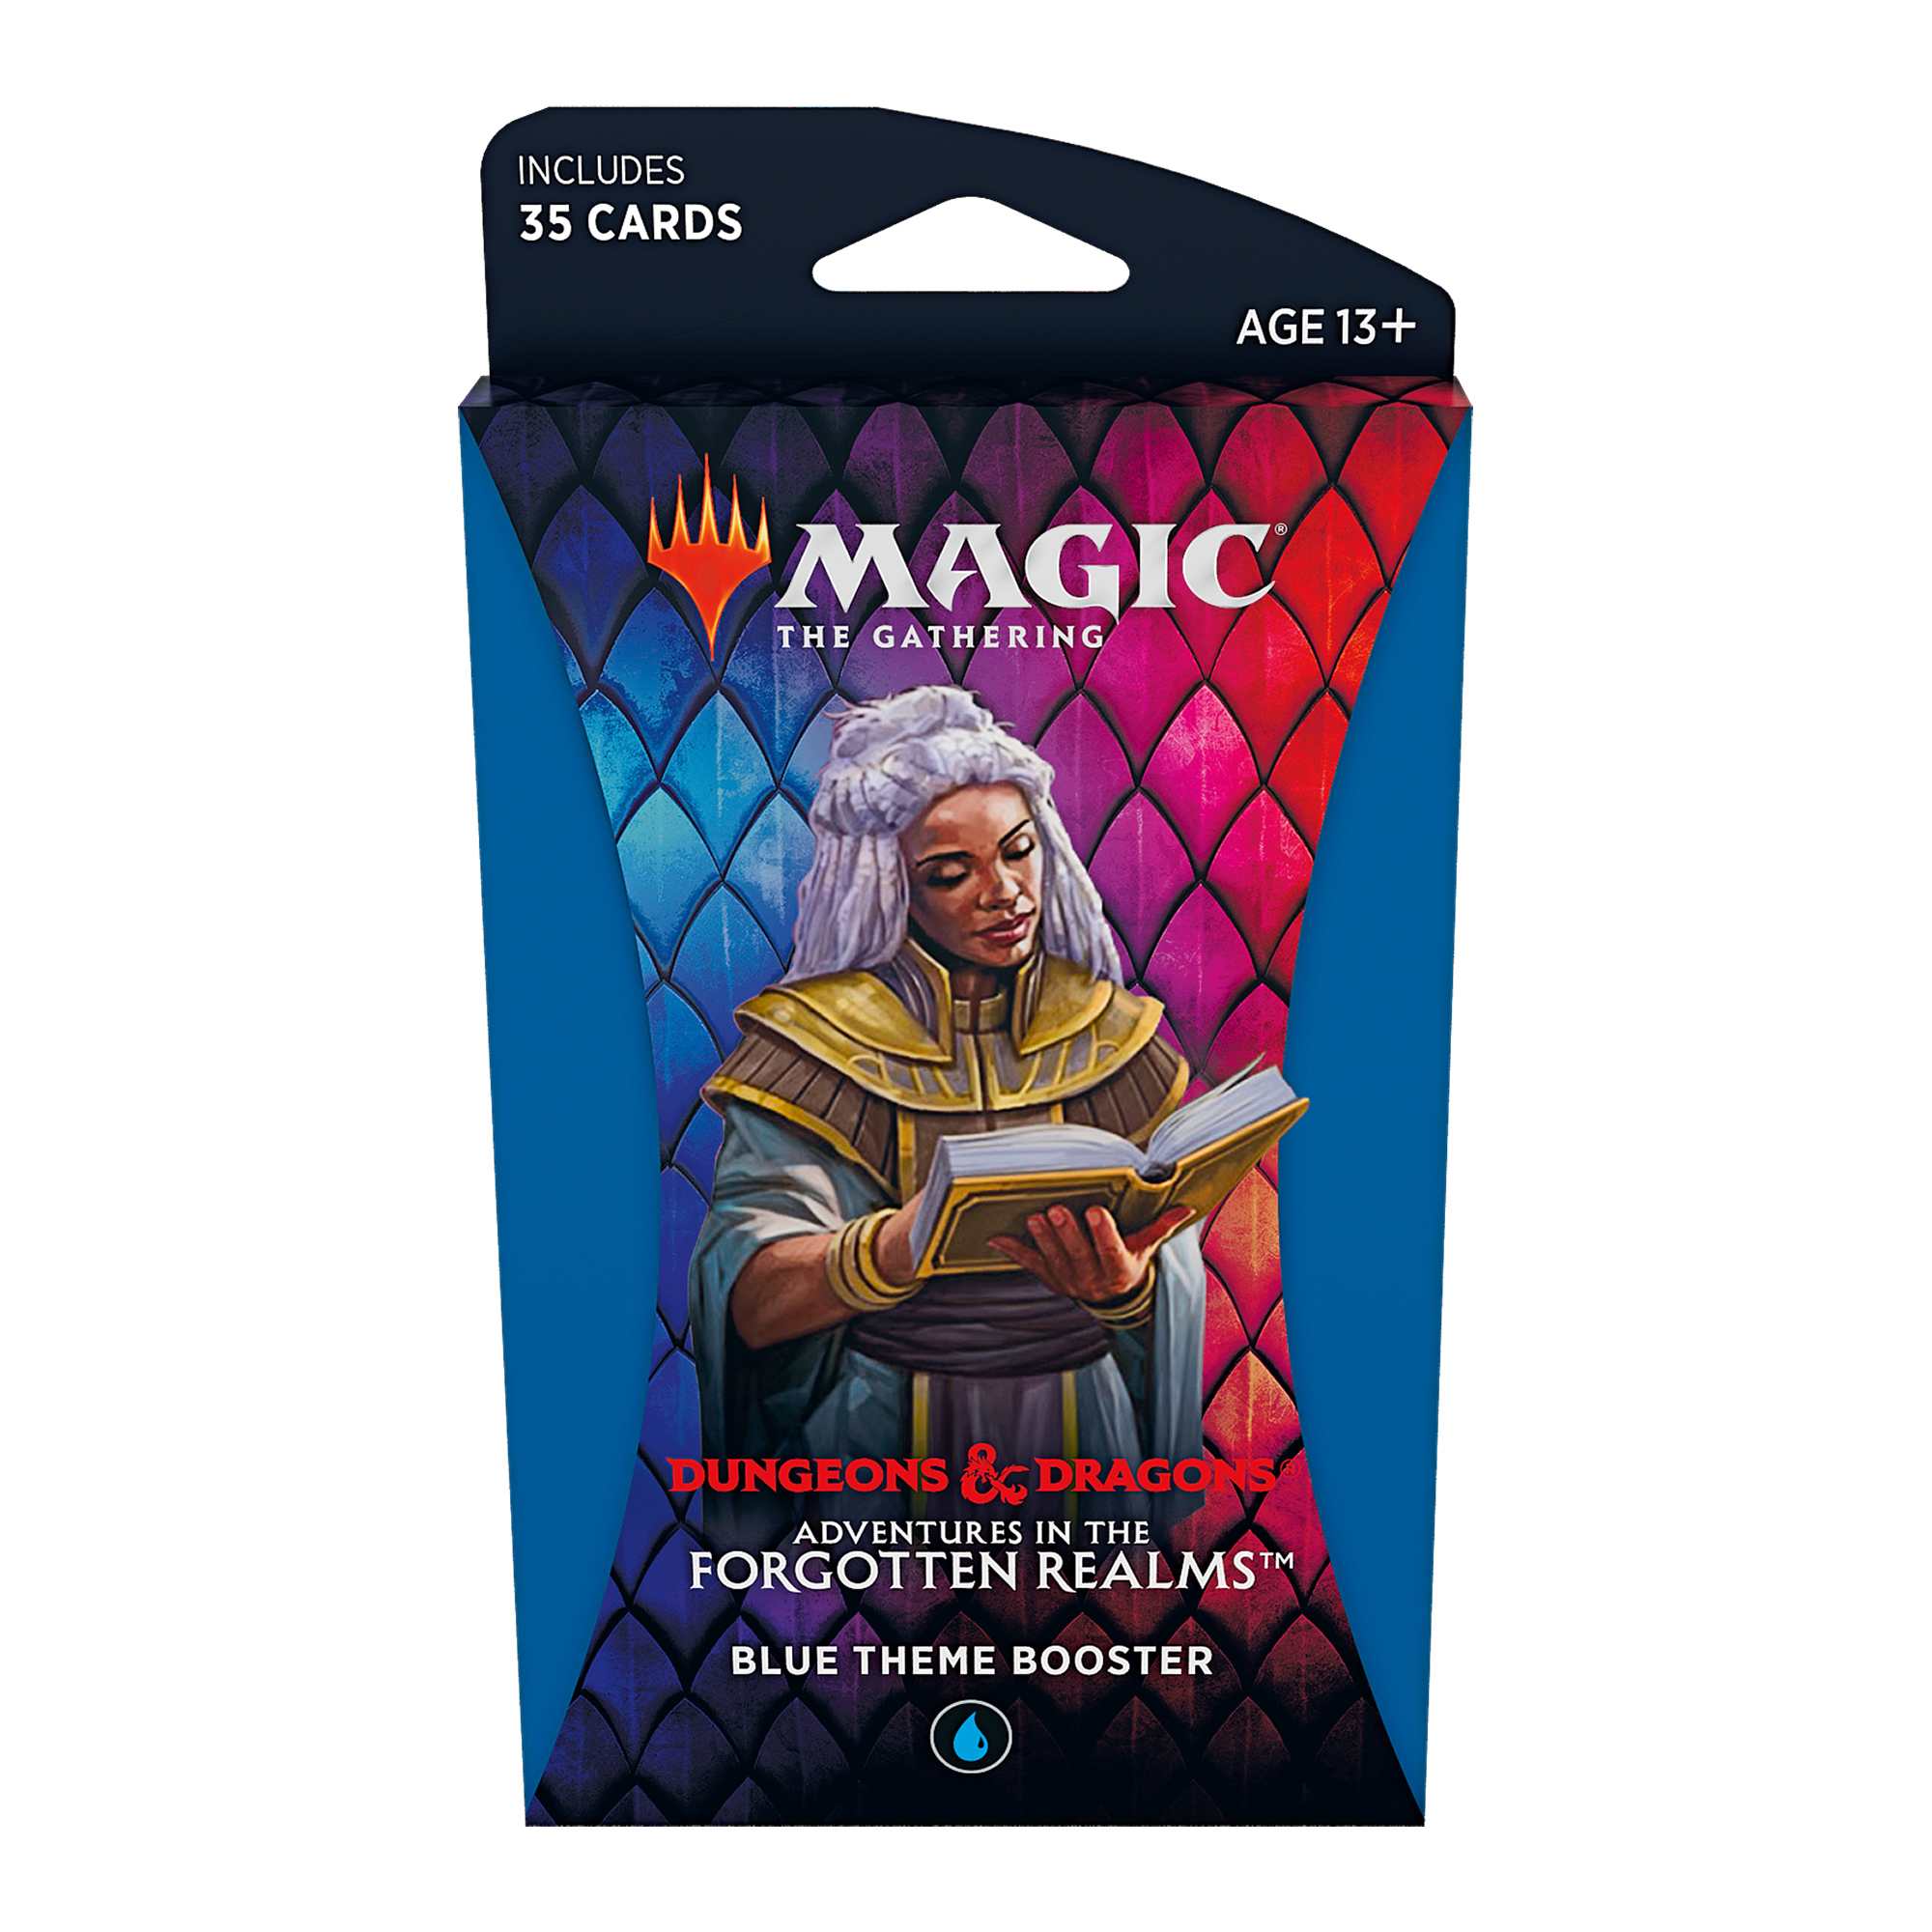 Wizards of the Coast Magic The Gathering - Adventures in the Forgotten Realms Theme Booster Varianta: Blue Theme Booster